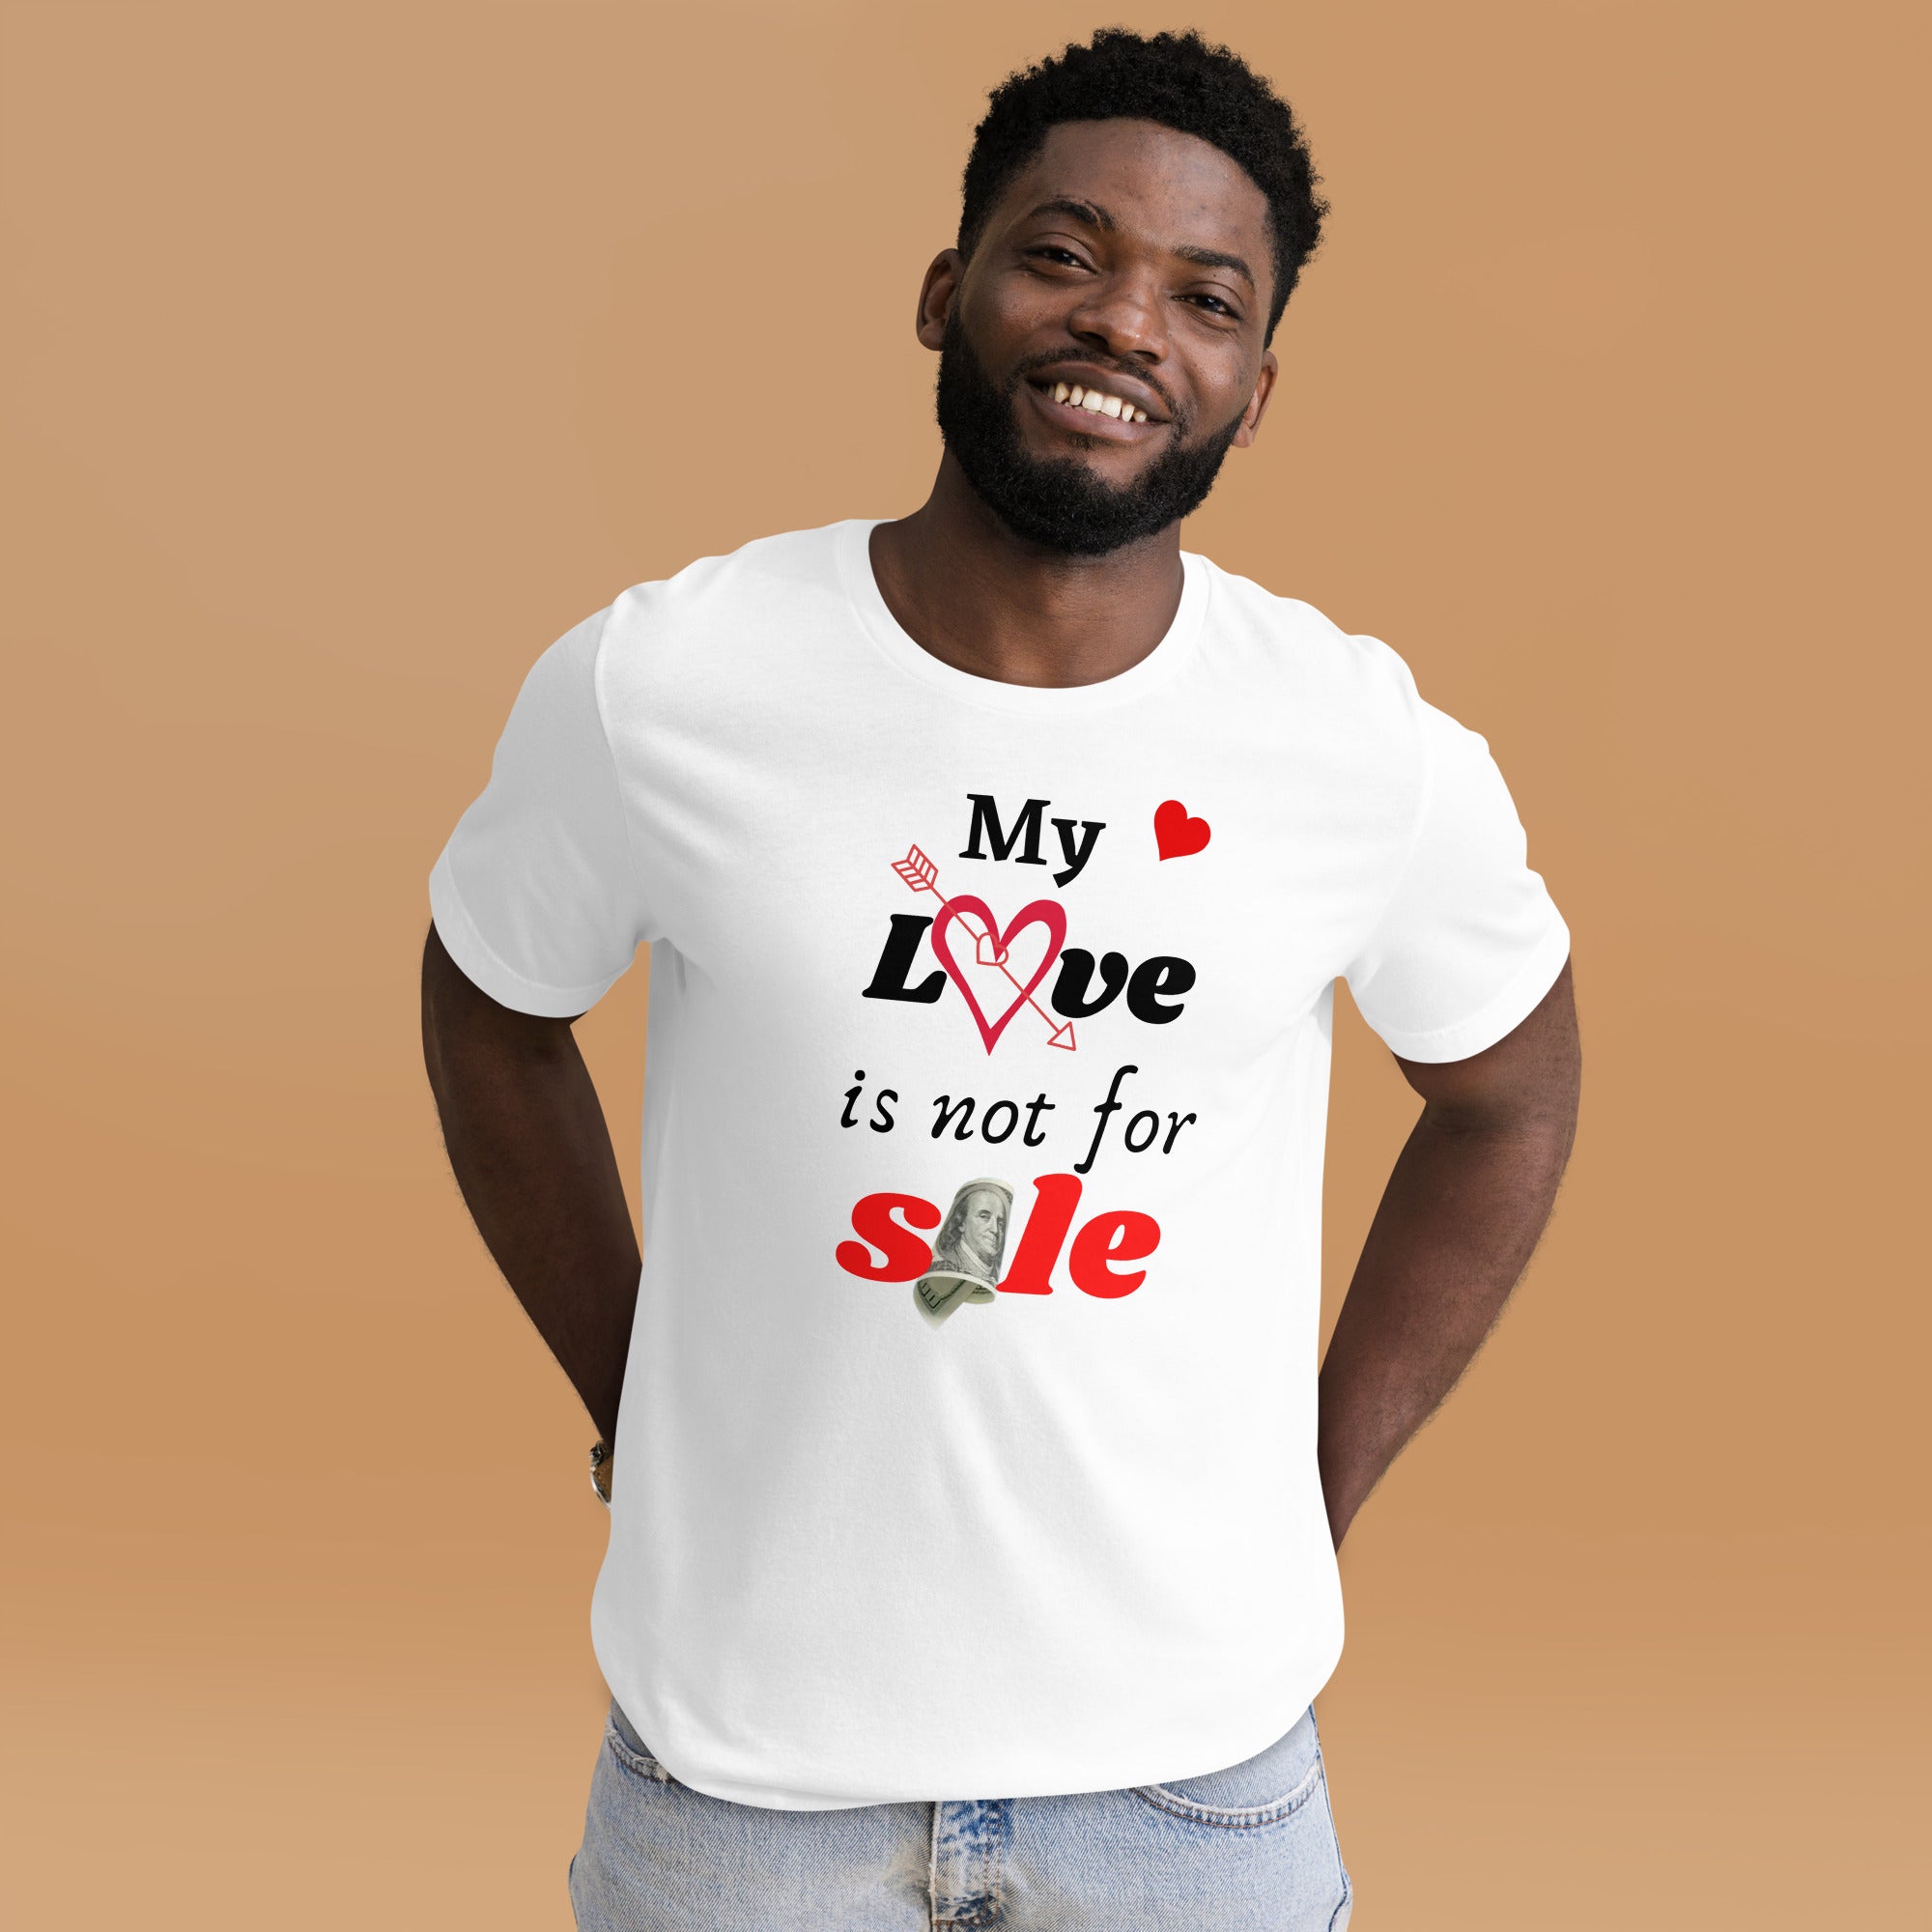 LOVE is not for SALE Tees - Angat Pinoy OSC